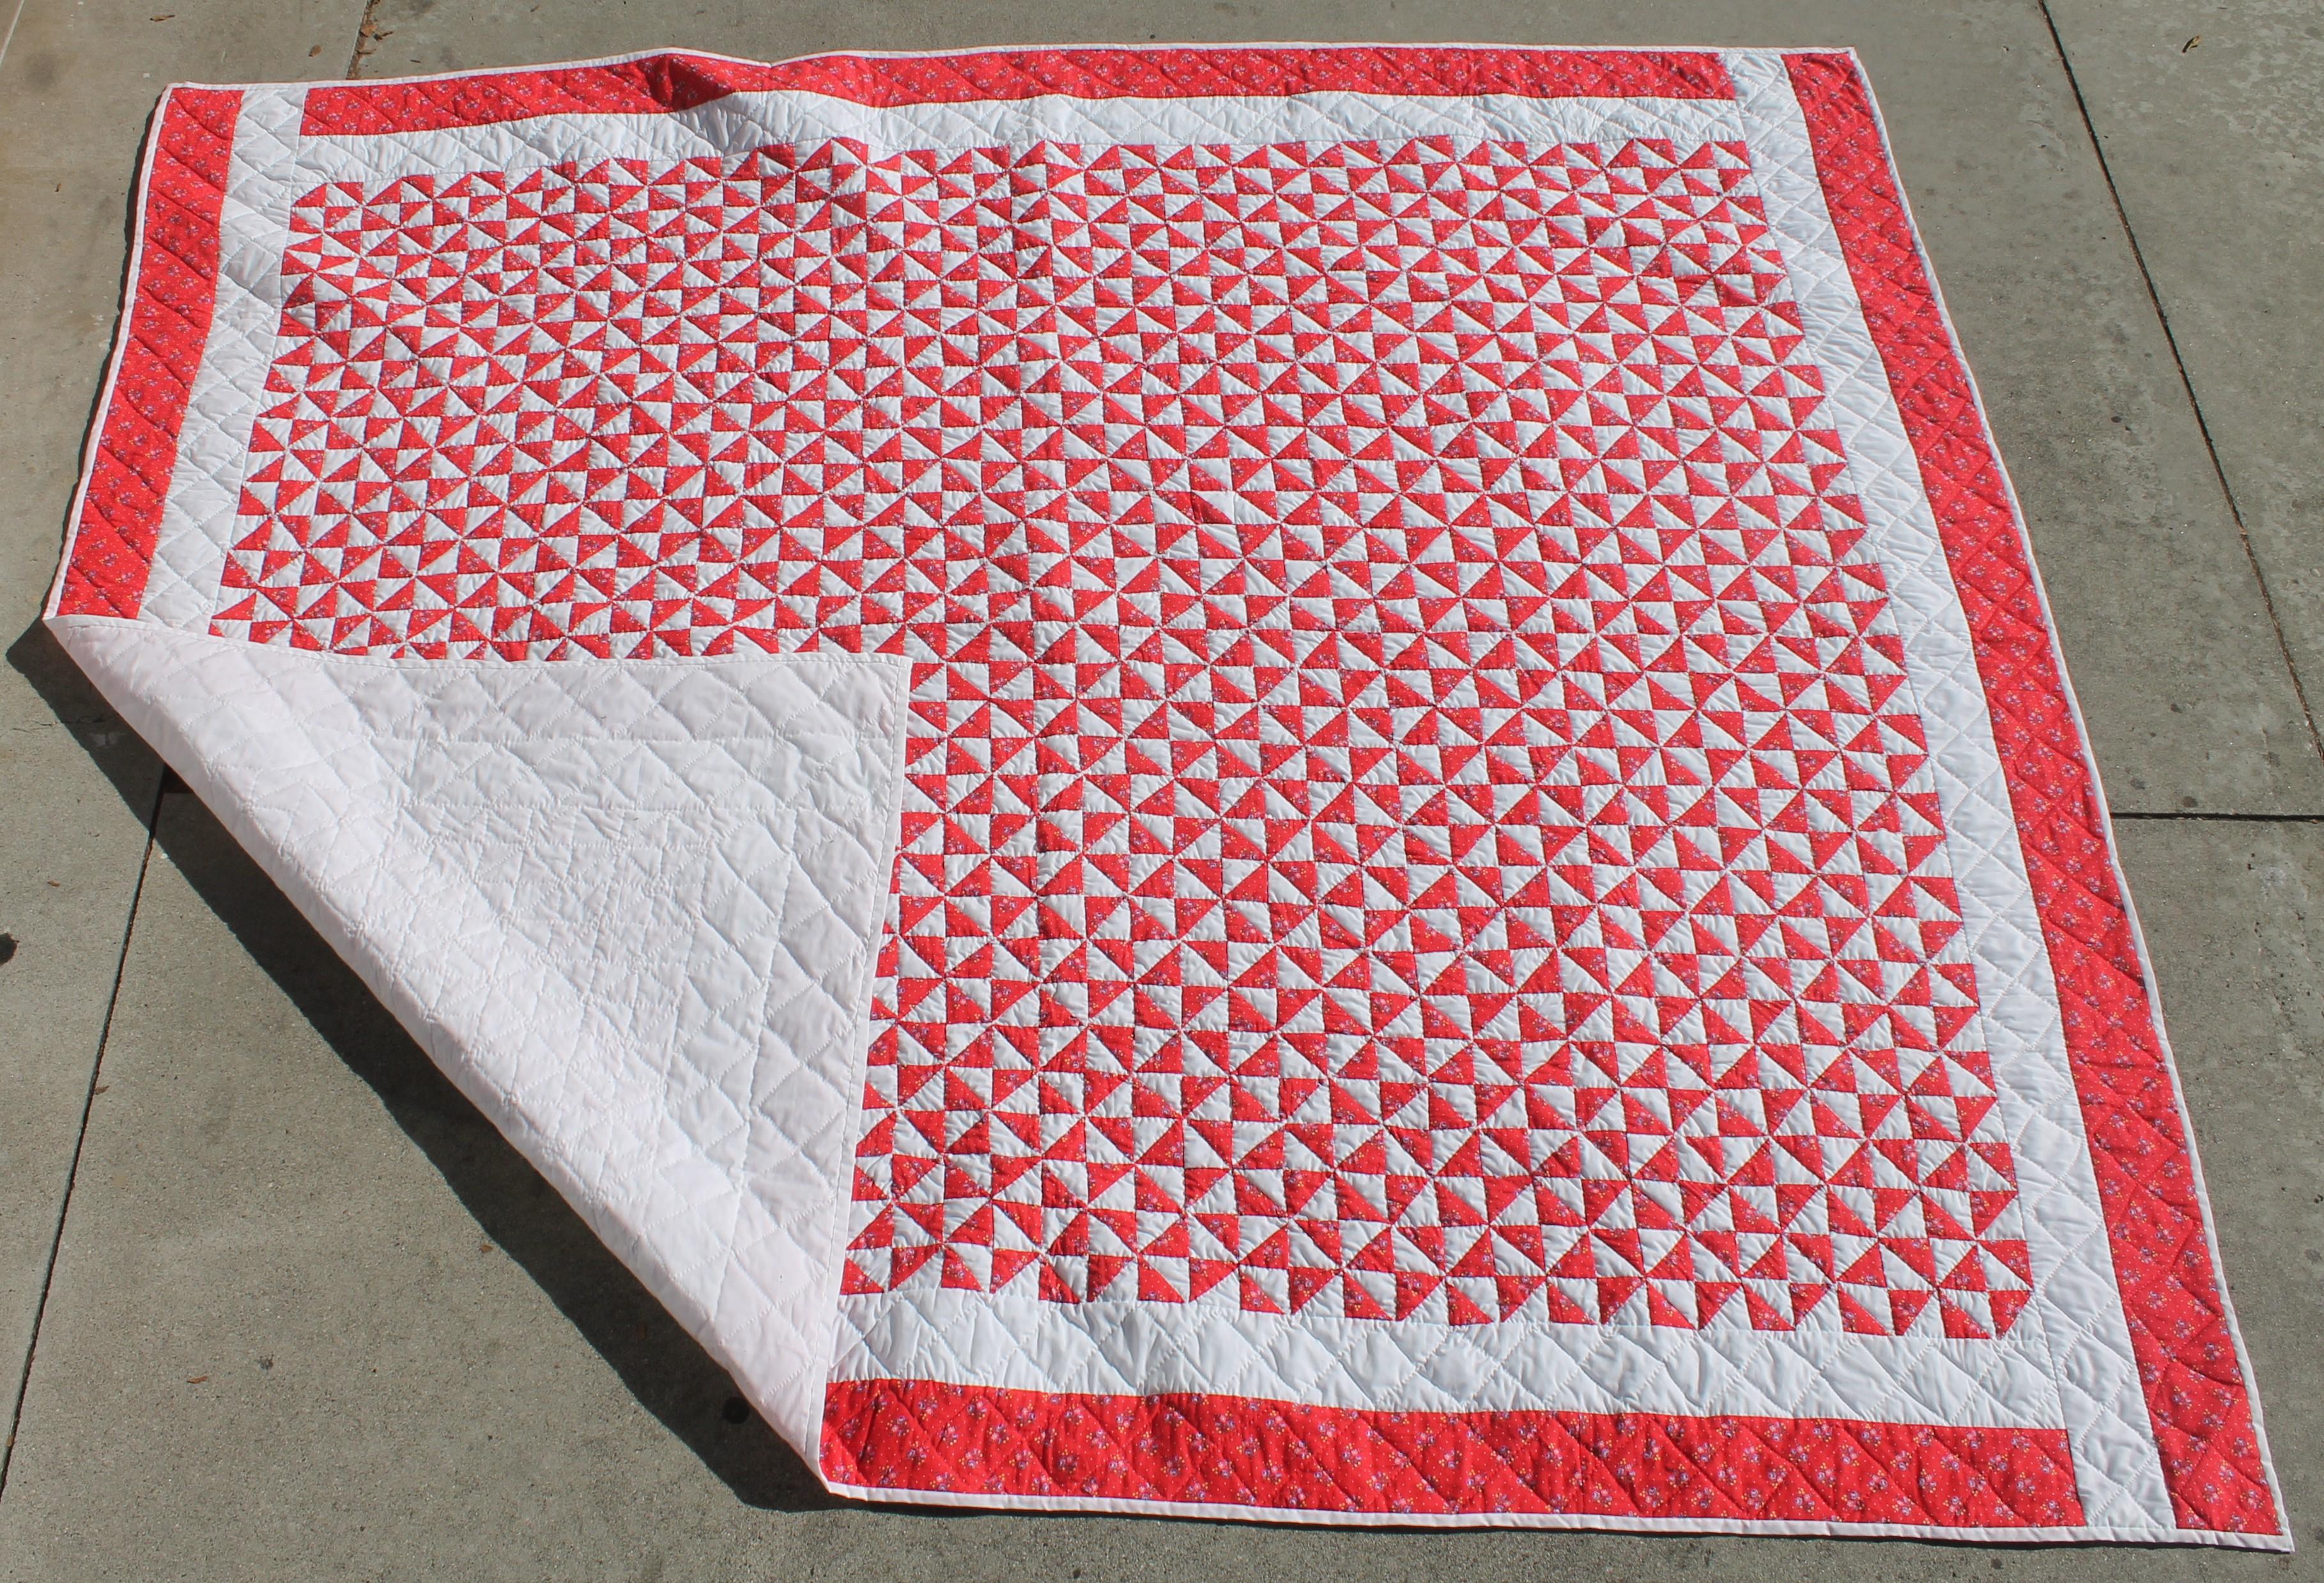 Hand-Crafted Antique Quilt - 20th Century Mini-Triangles Quilt Red and White